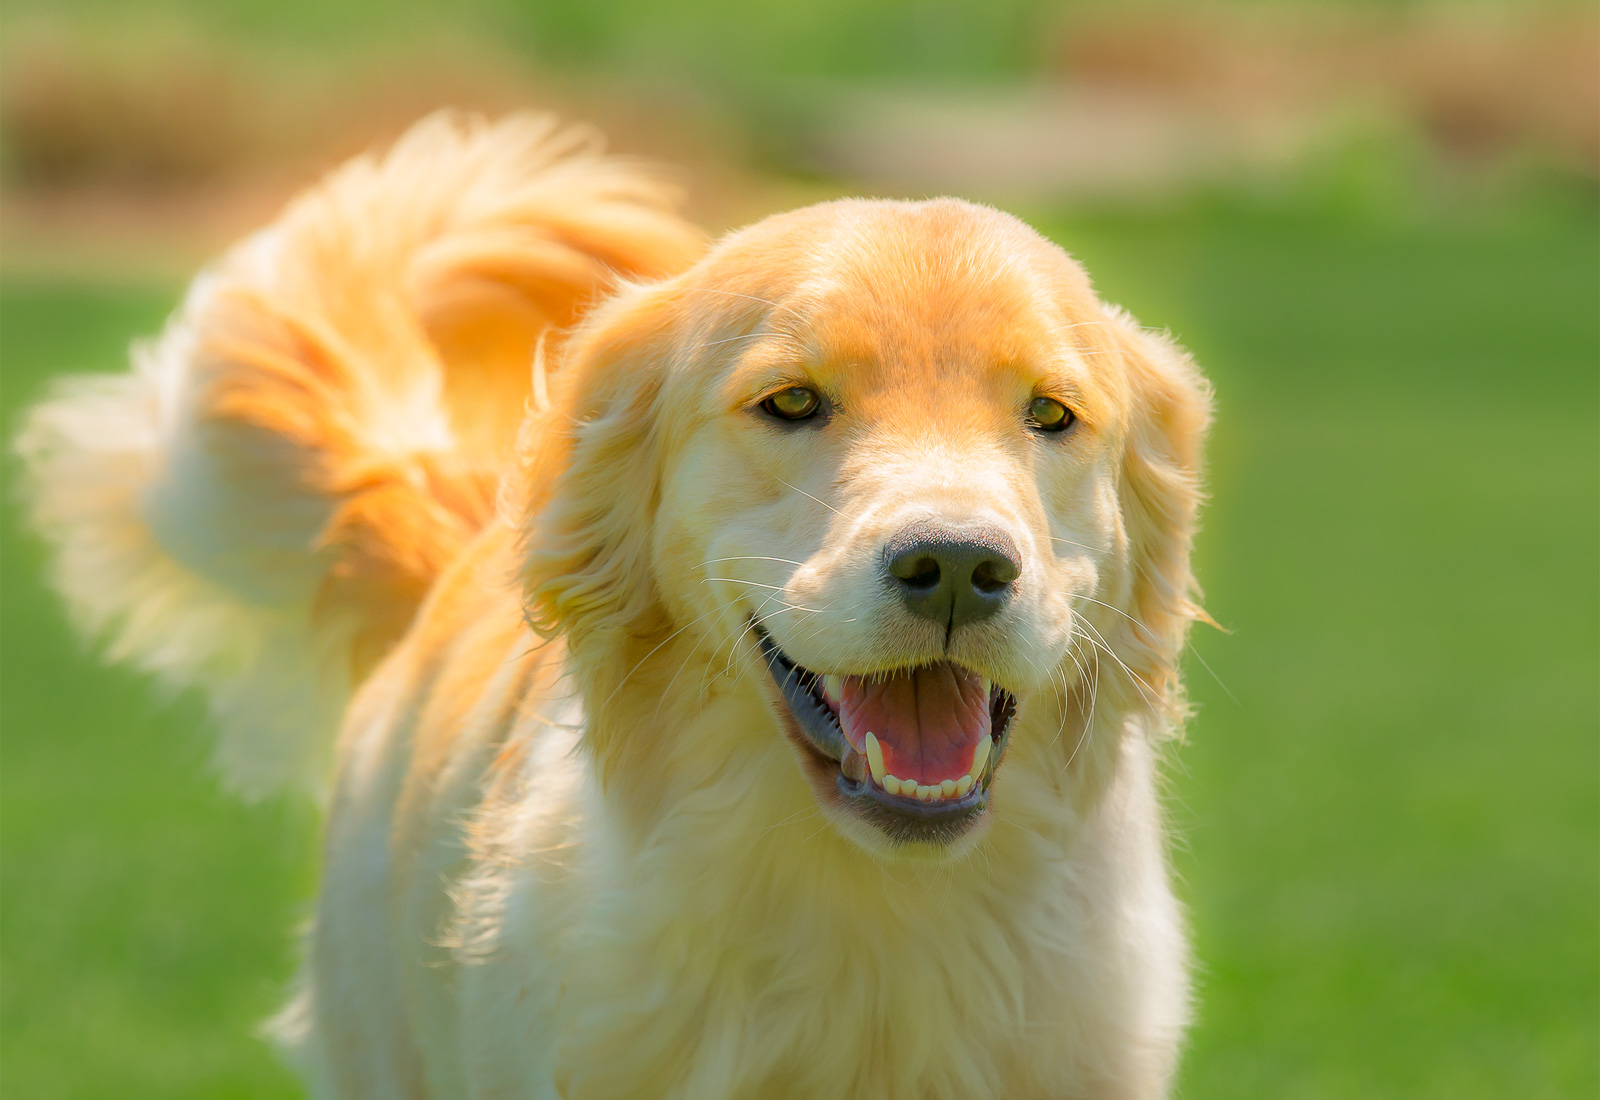 Golden Retriever Puppy Smiling while Prancing